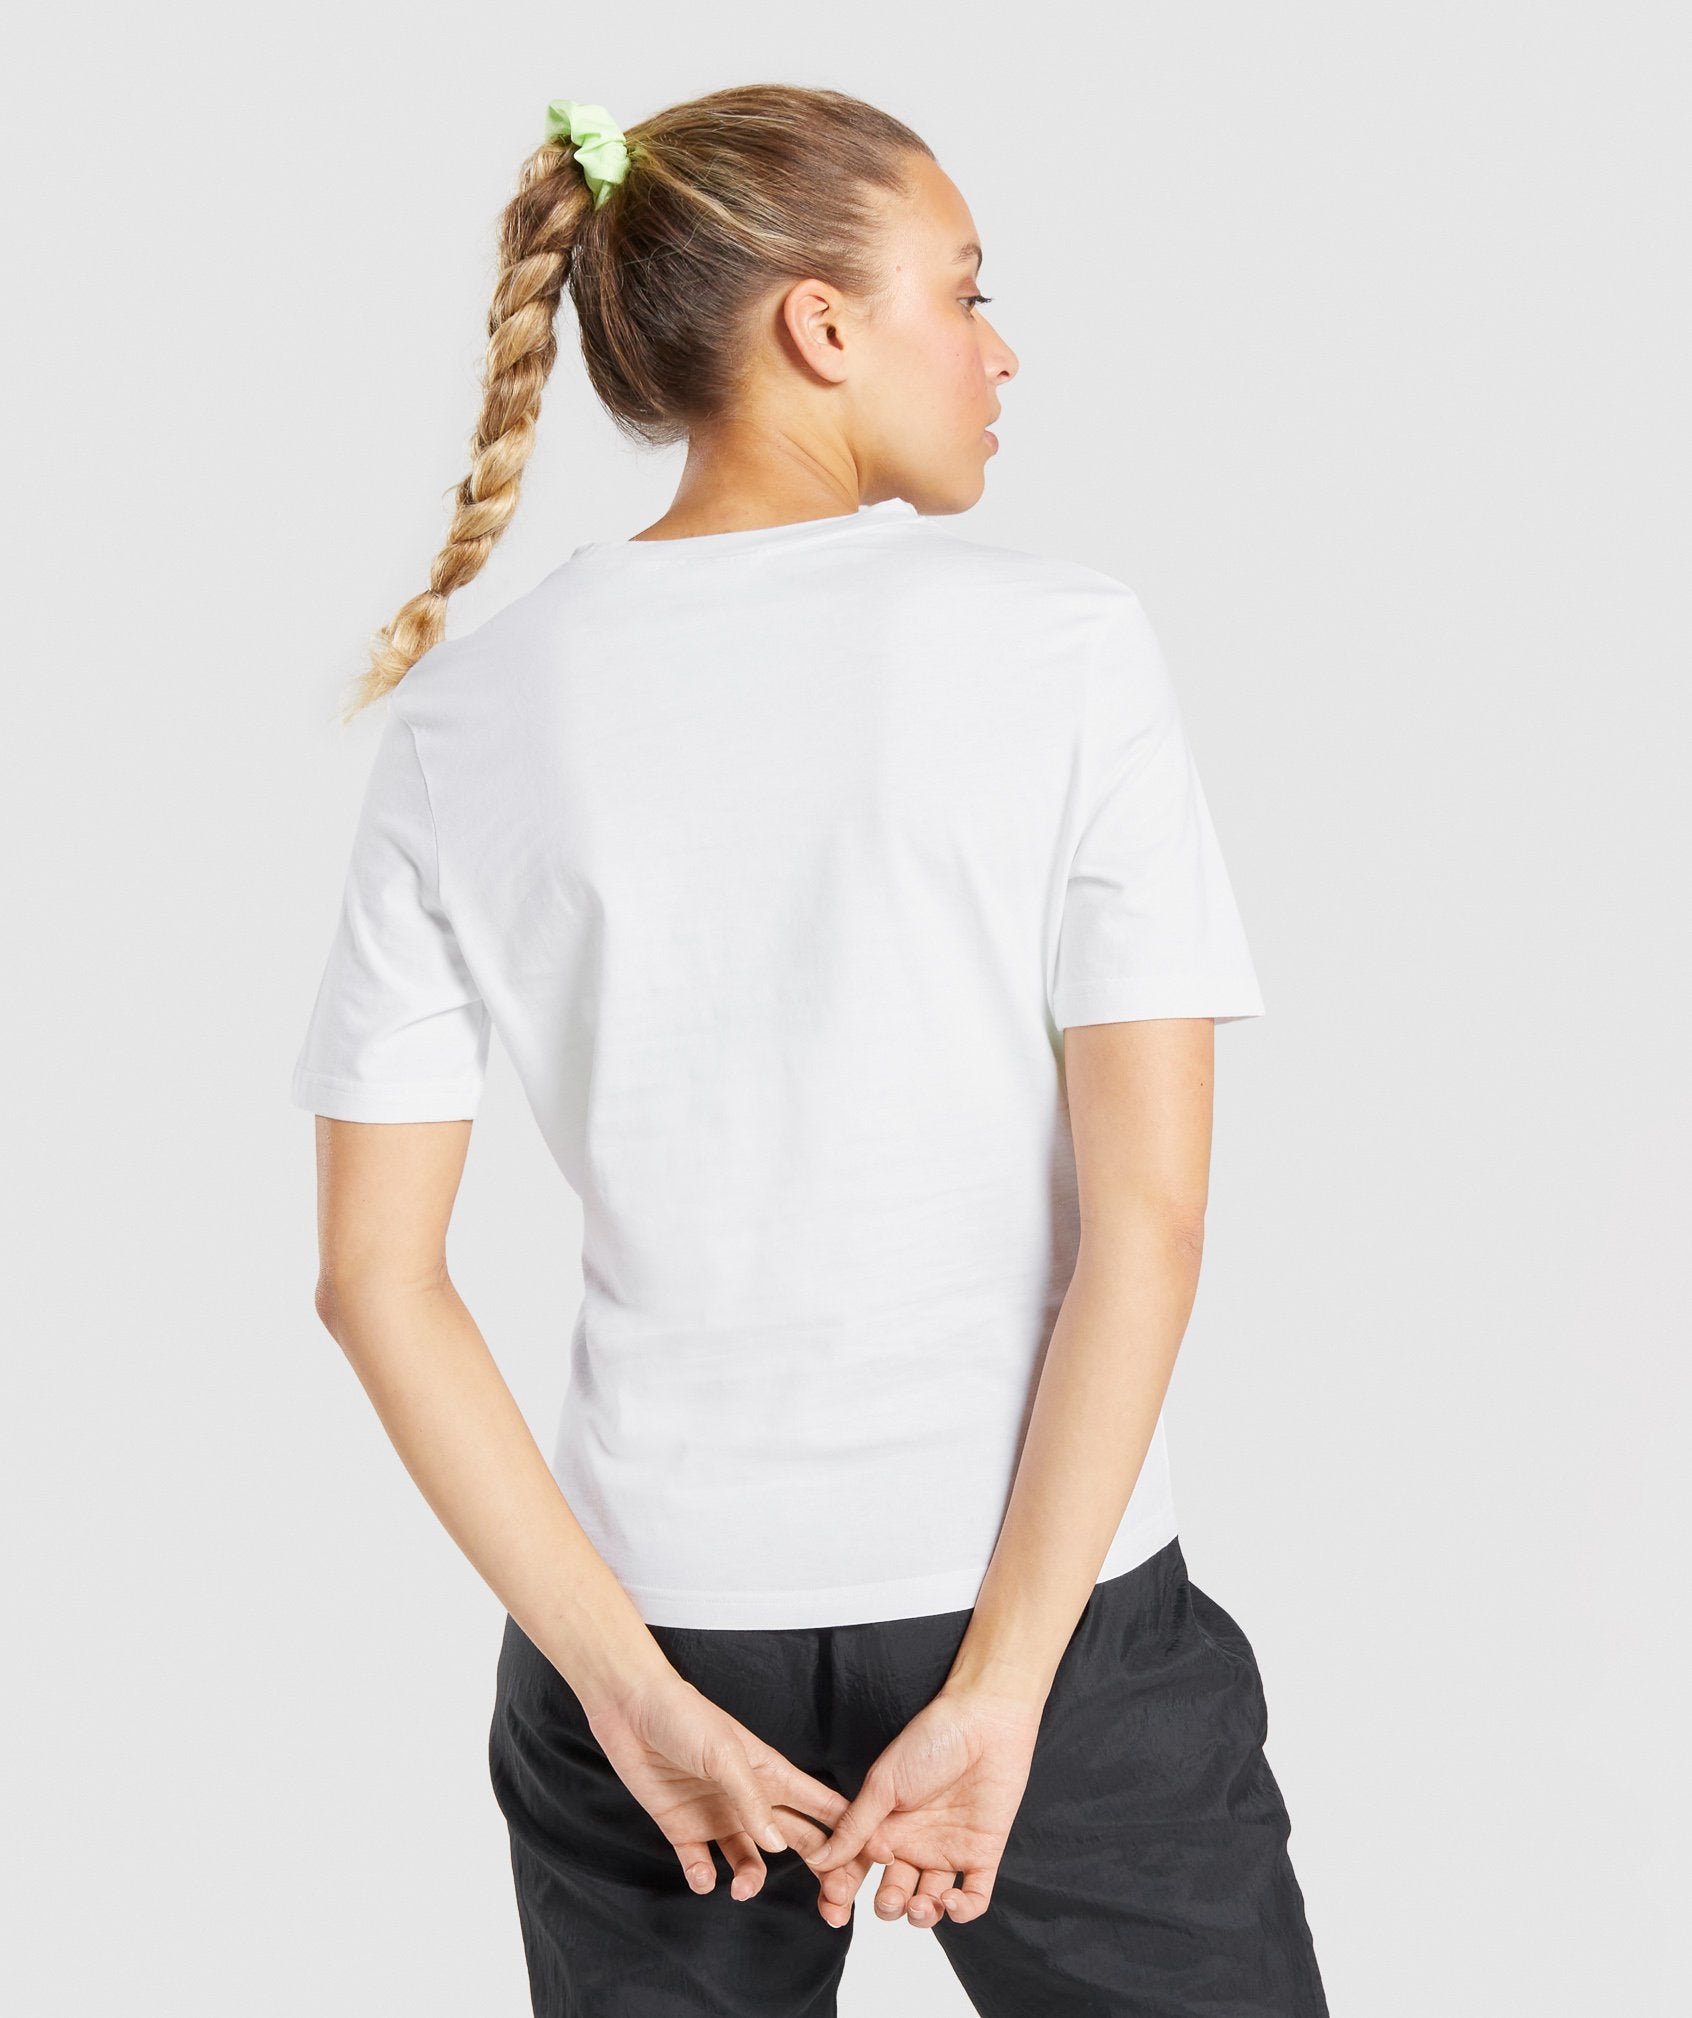 CTY T-Shirt in White - view 3